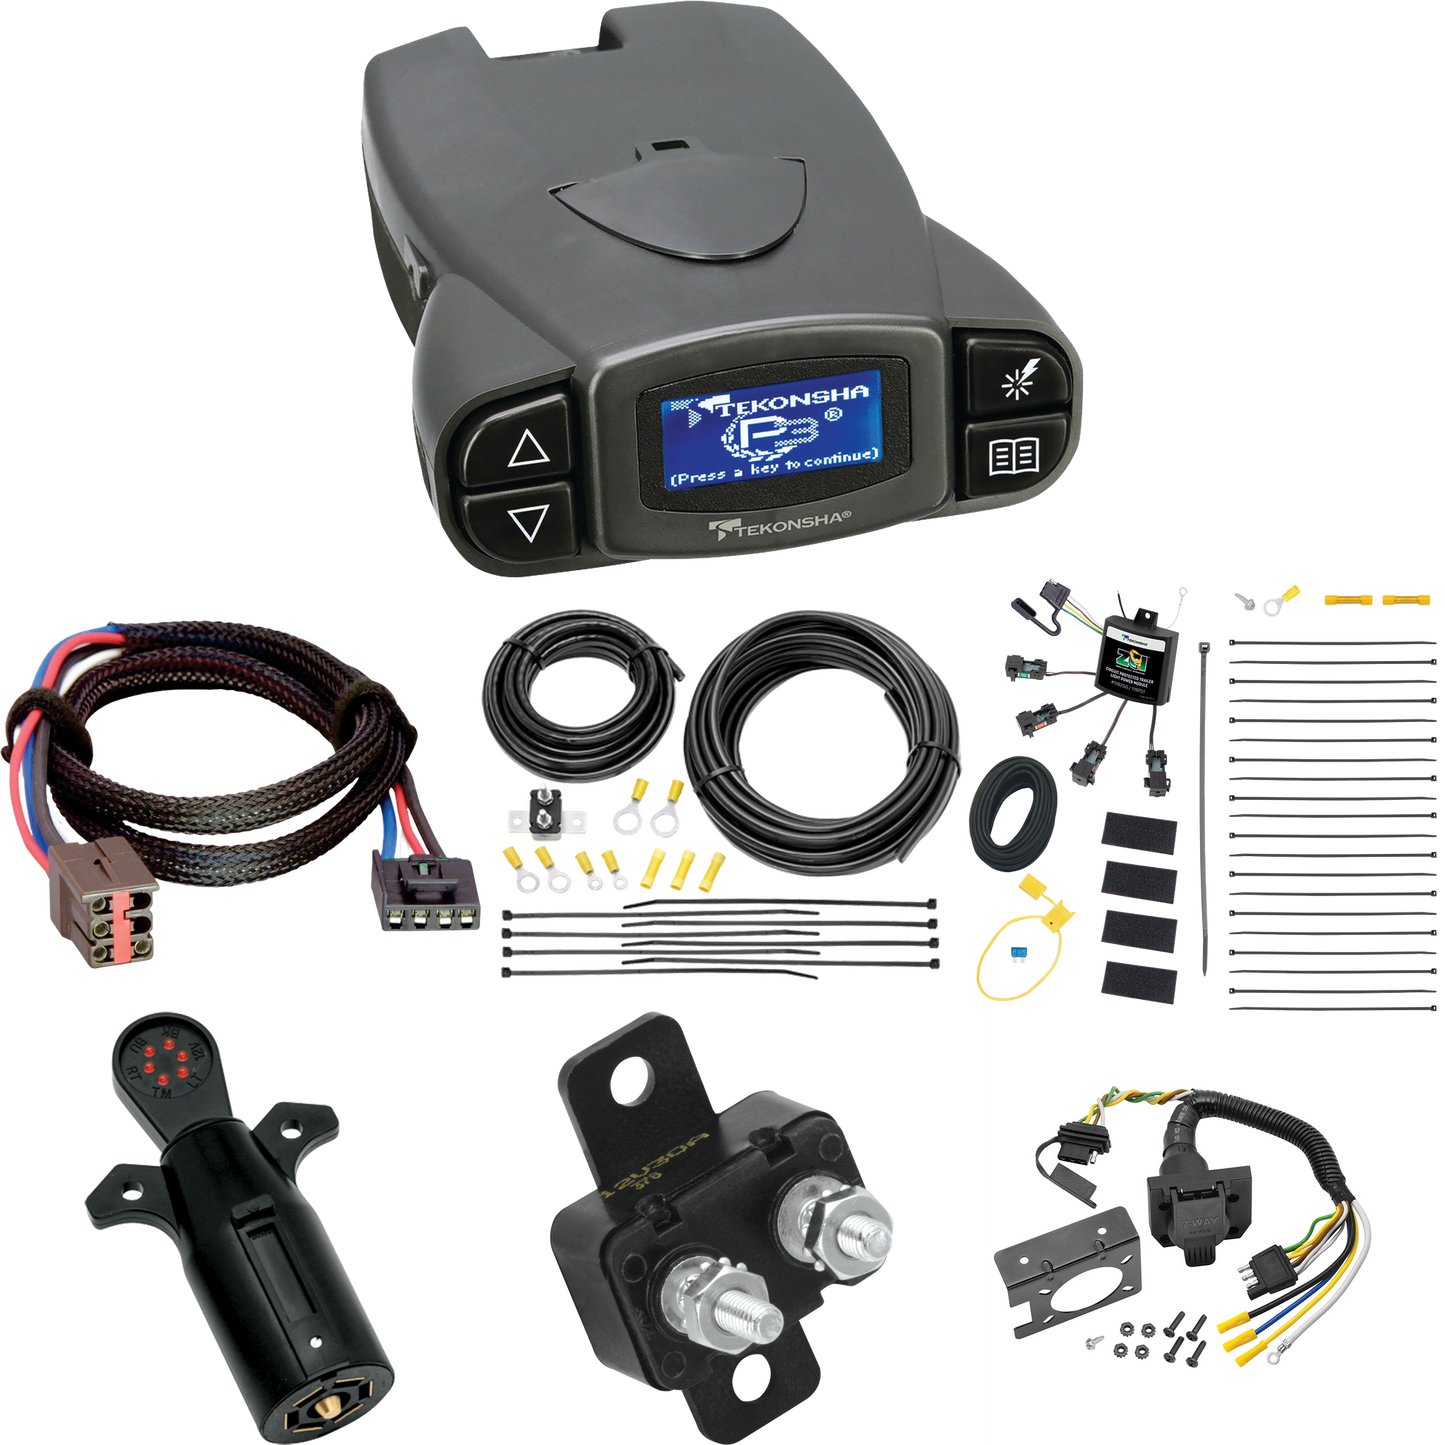 Fits 1999-2003 Ford Windstar 7-Way RV Wiring w/ Zero Contact ZCI Module + Tekonsha Prodigy P3 Brake Control + Plug & Play BC Adapter + 7-Way Tester (For (Built Before 11/2002) Models) By Tekonsha